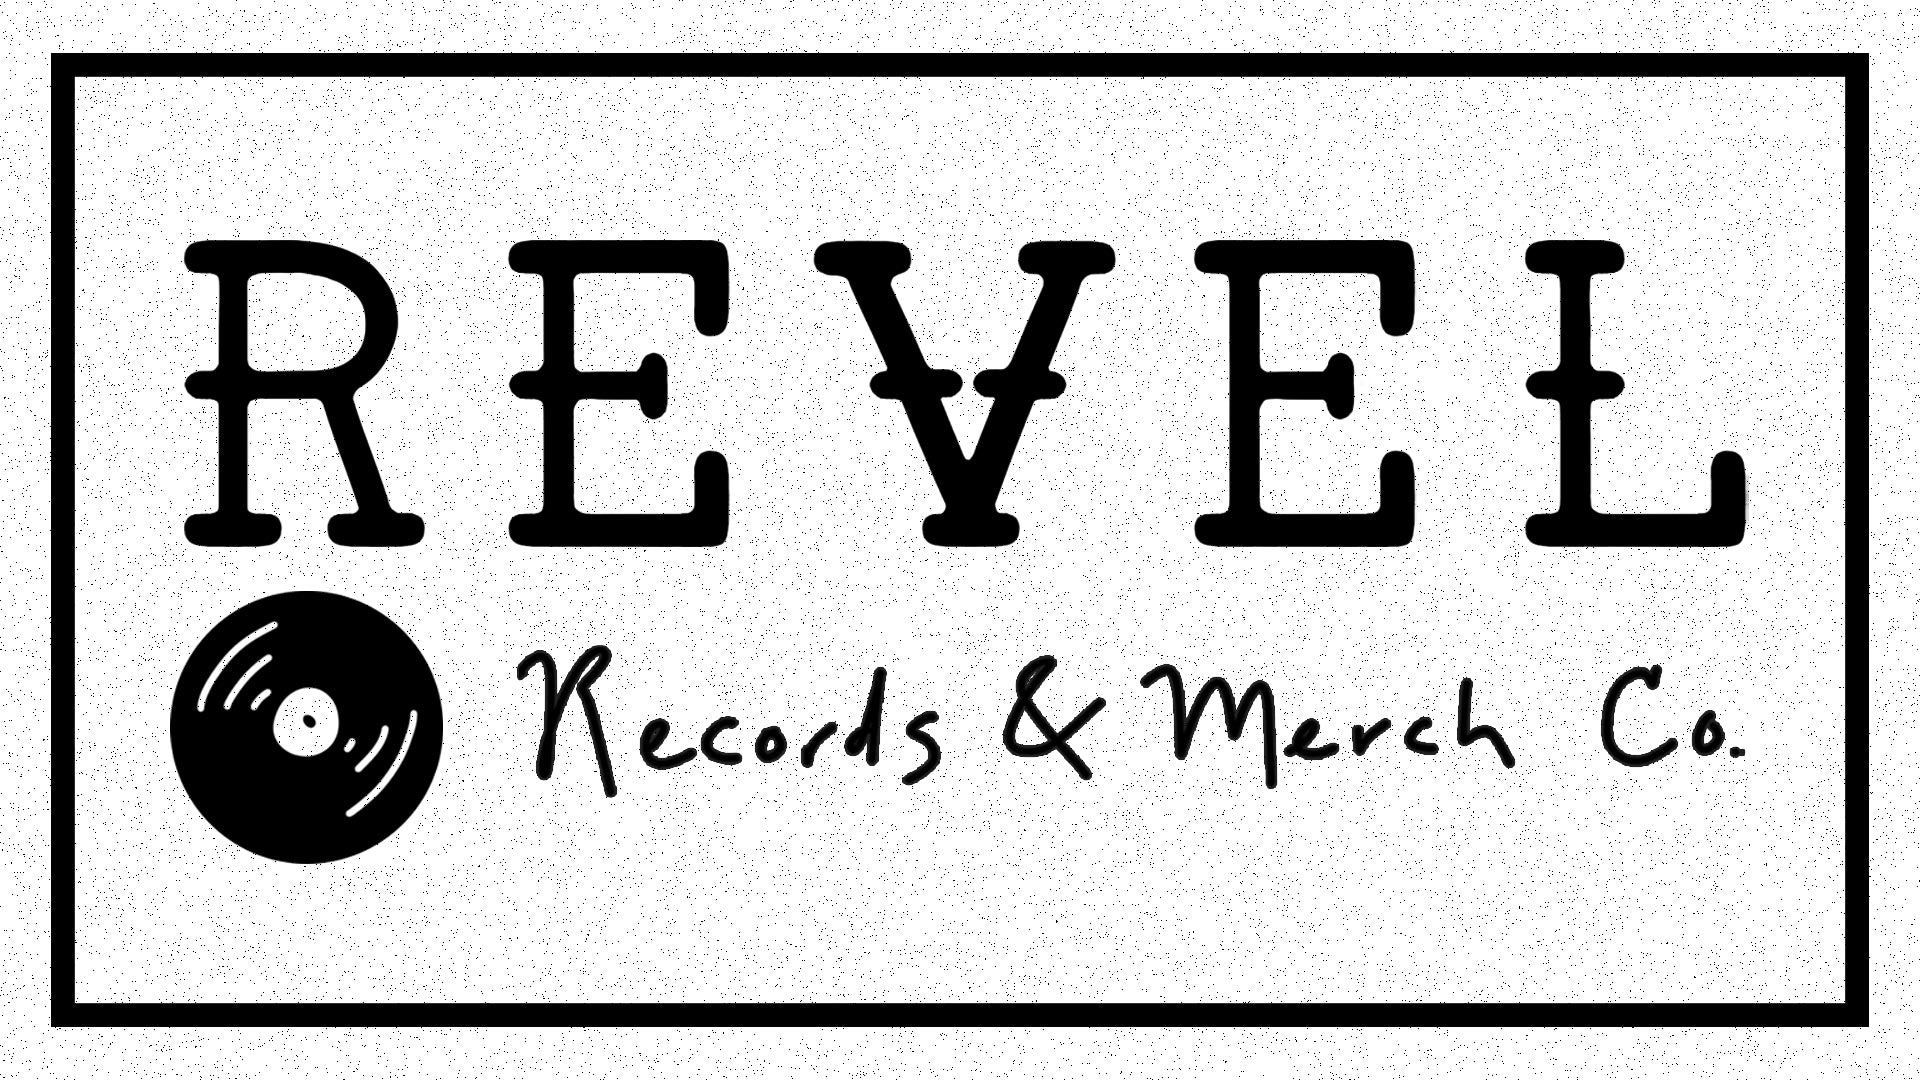 Revel Records and Merch Co.